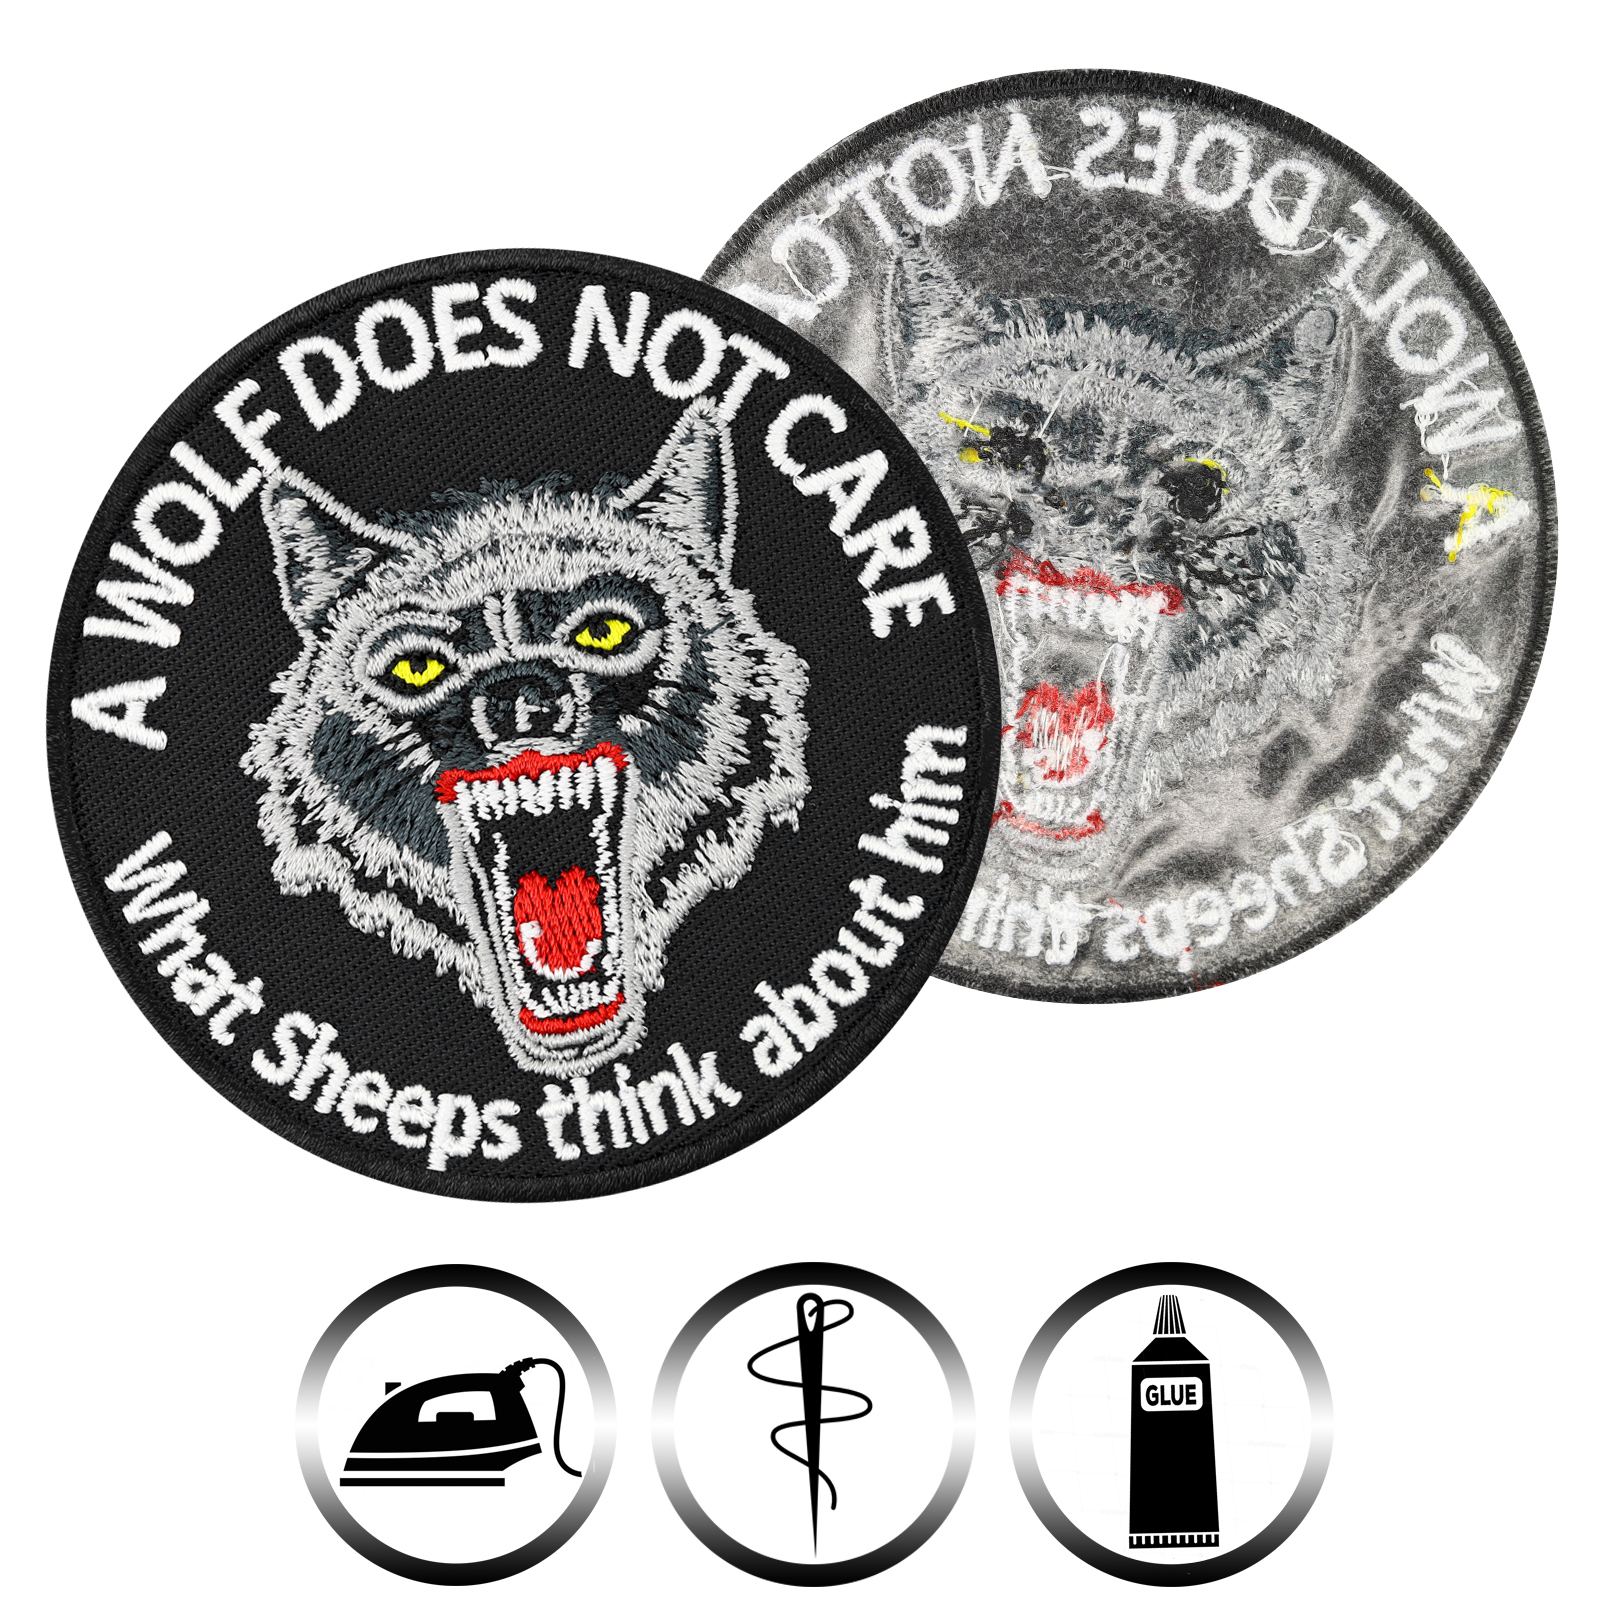 A wolf does not care what sheeps think about him - Patch